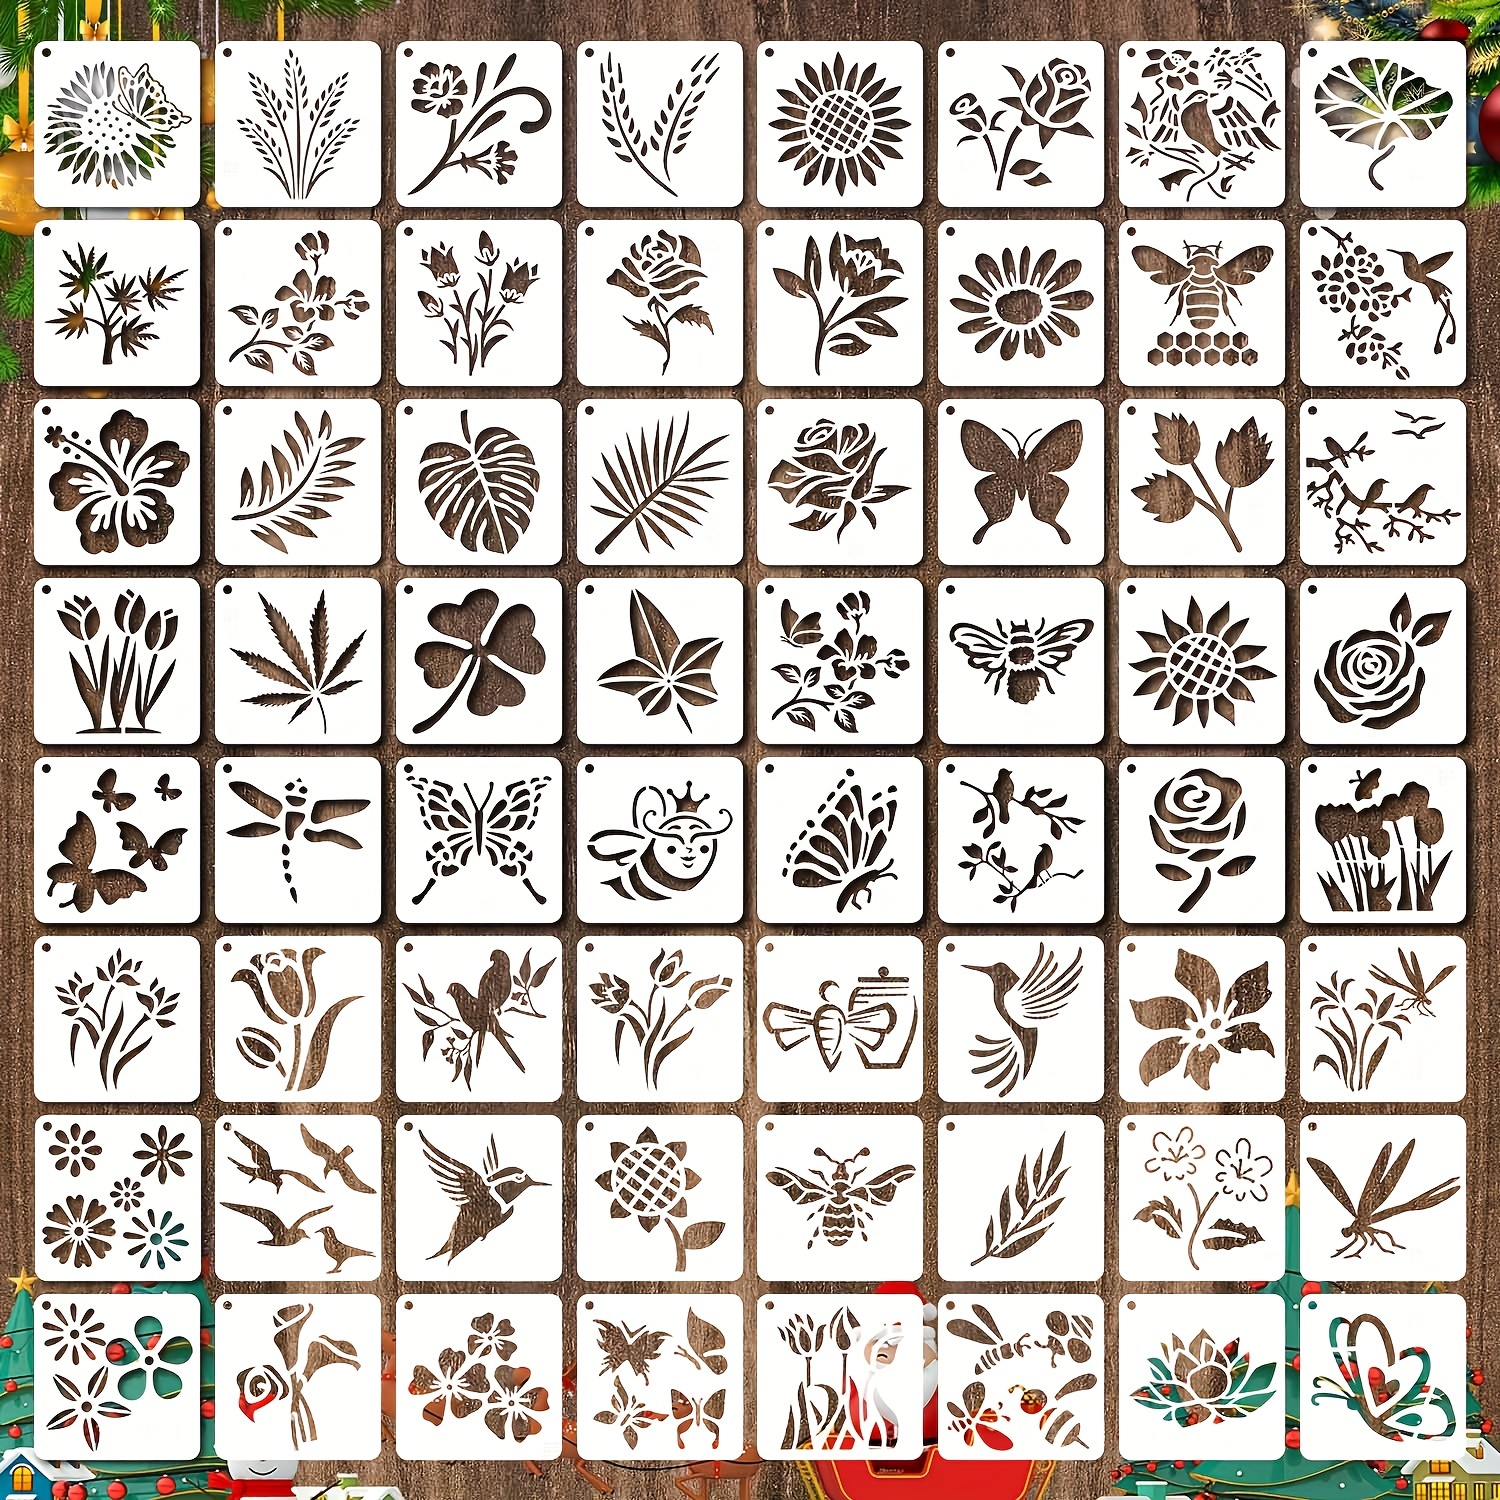 

64pcs Stencils For Painting, Small Reusable Flower Plant Stencil, Art Craft Template For Painting On Wood, Wall, Fabric, Rock, Chalkboard, Sign, Diy Art Scrapbook Projects